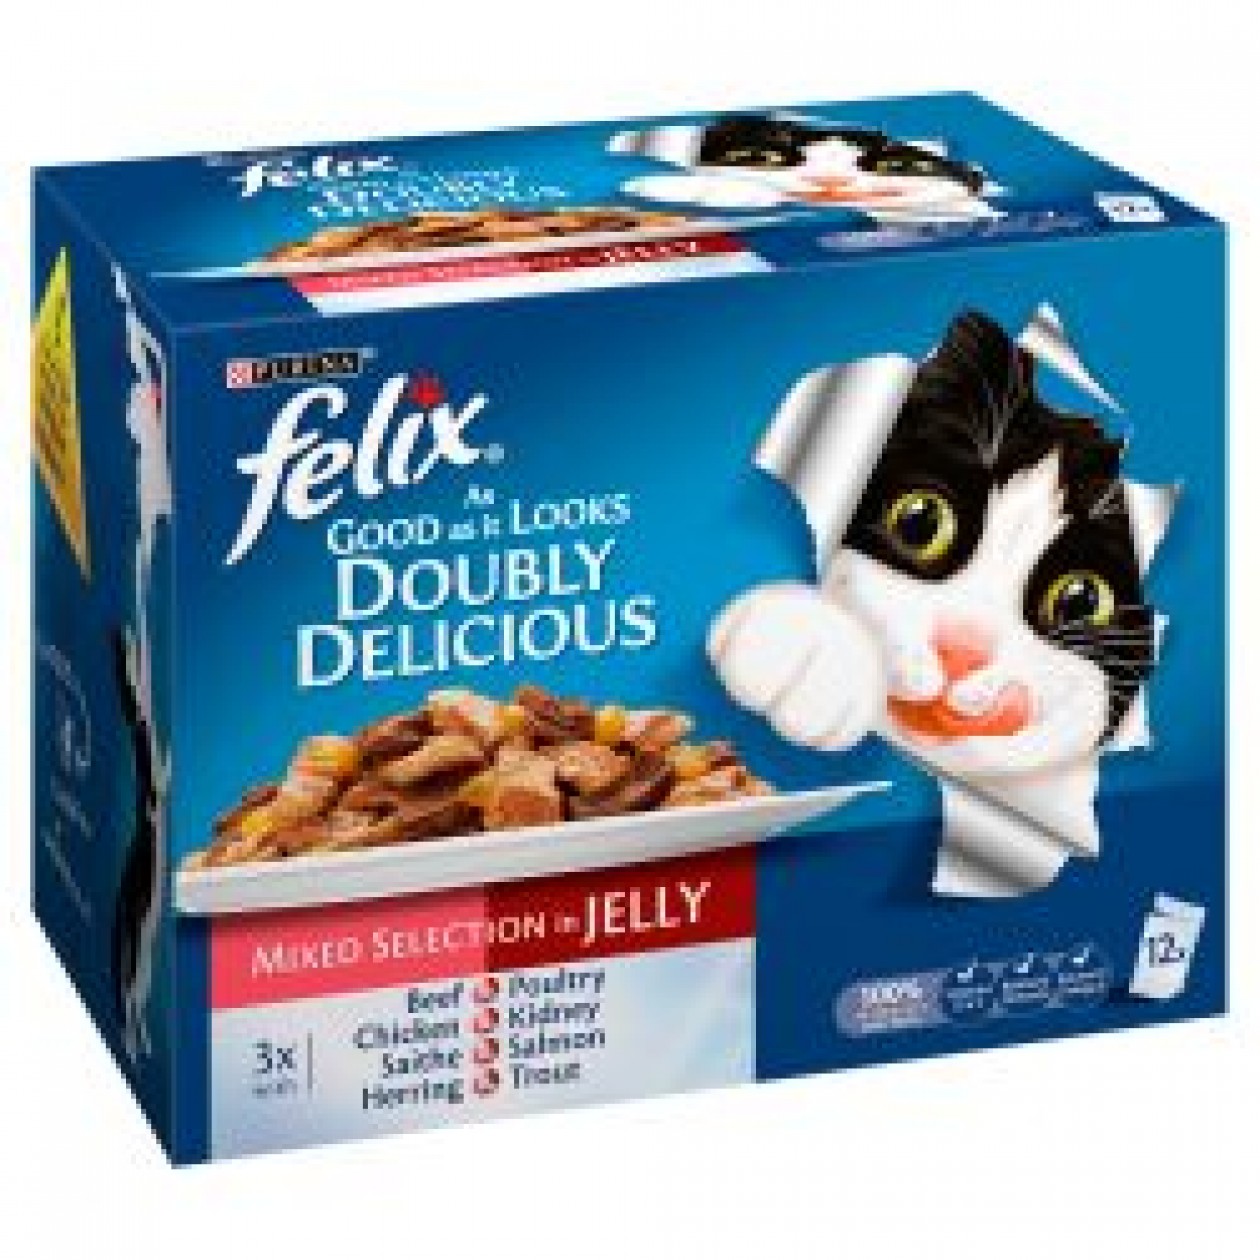 Felix As Good As It Looks Doubly Delicious Mixed Variety 12 Pack, 100g